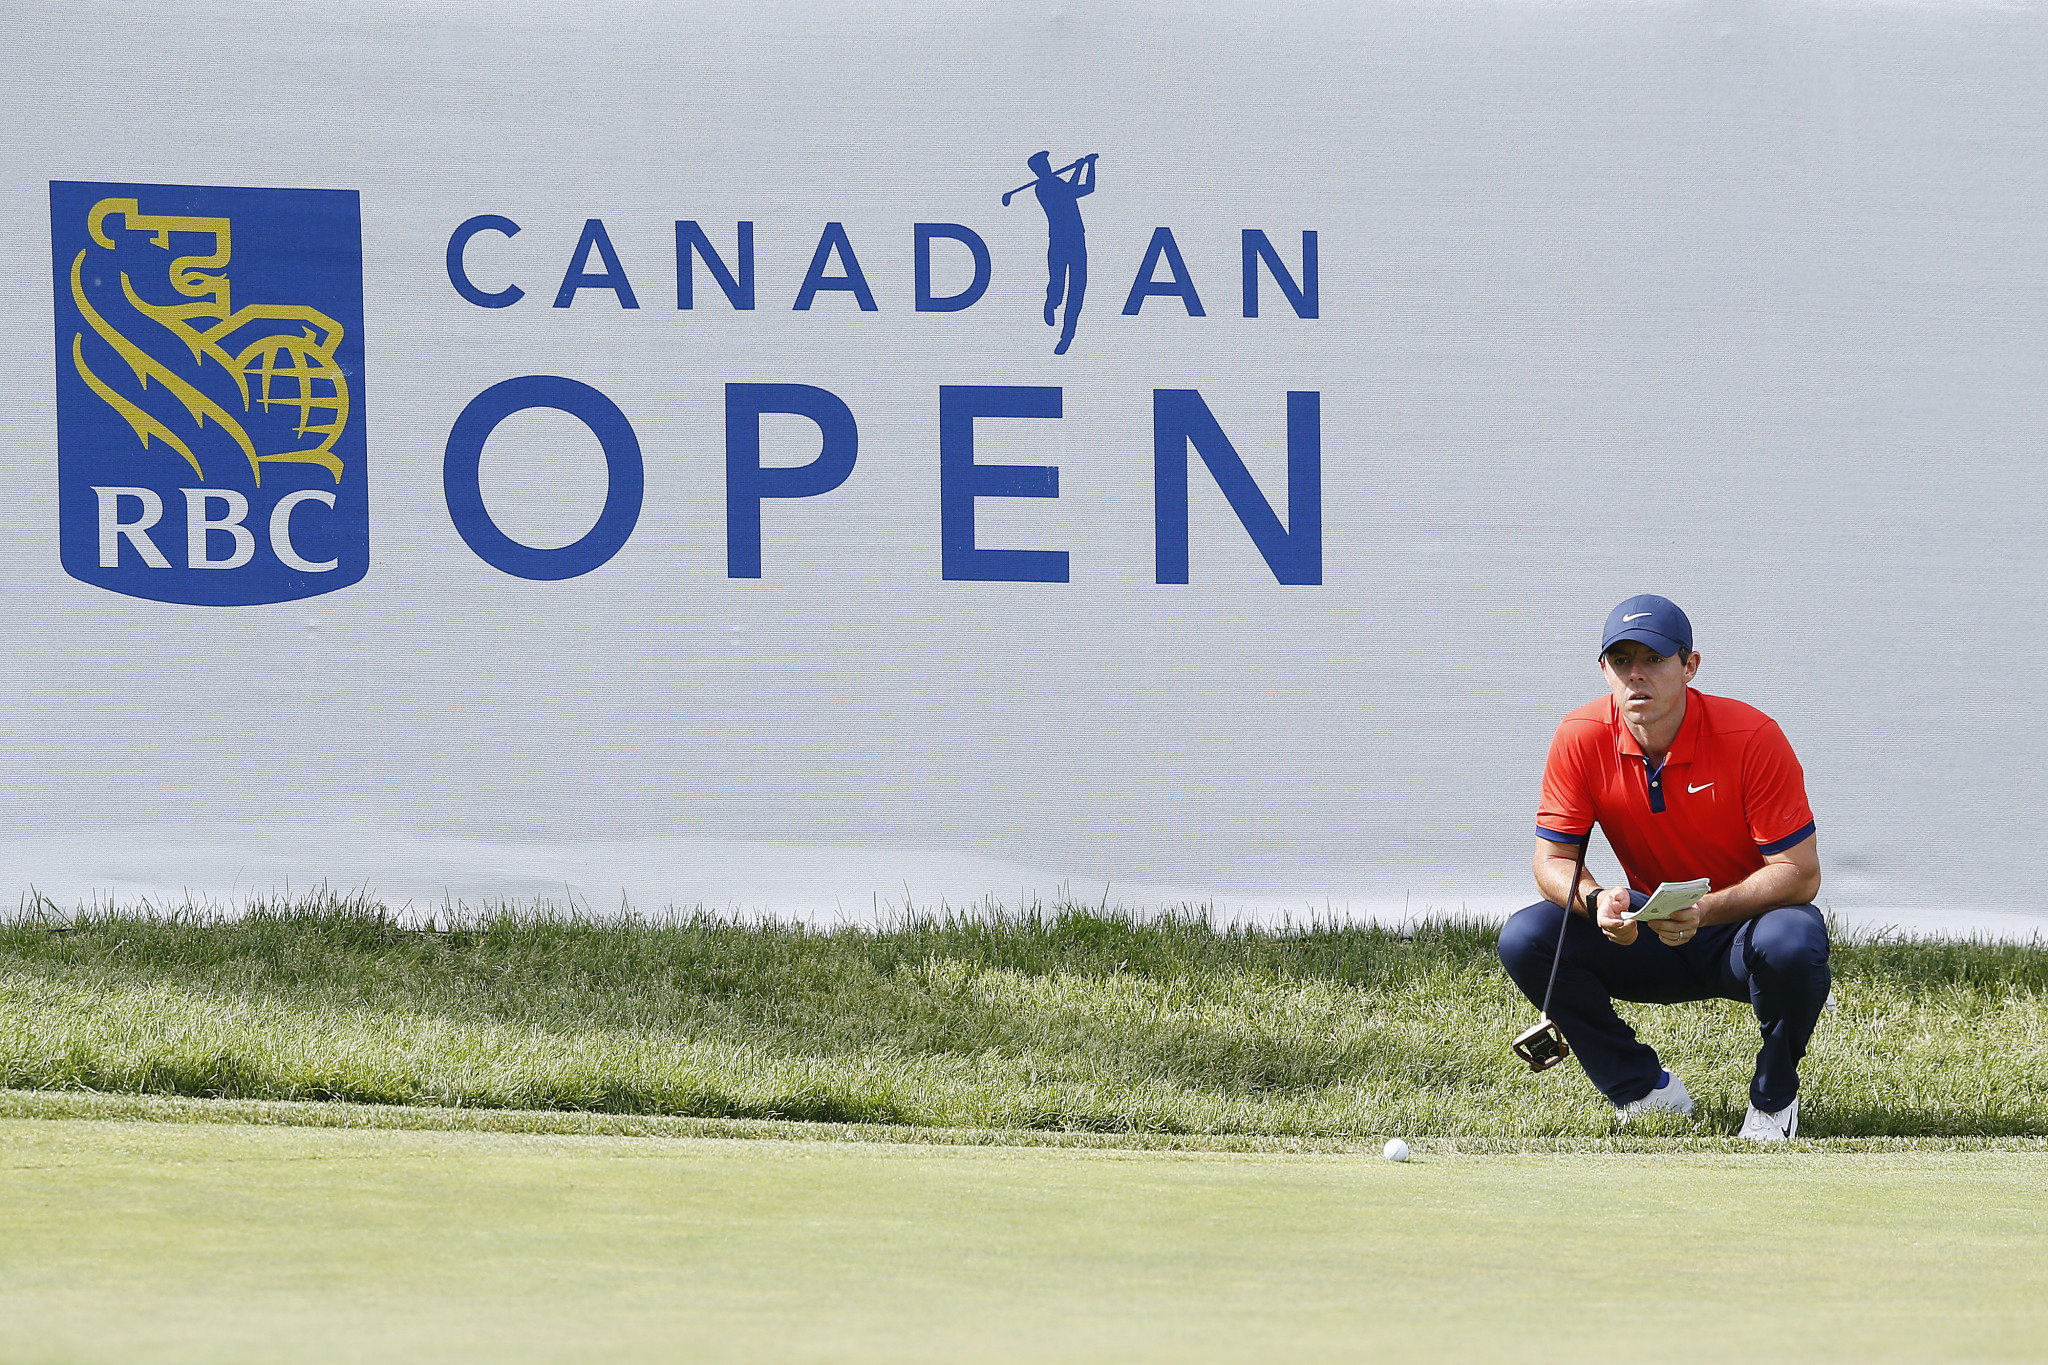 PGA Tour’s RBC Canadian Open likely to be cancelled due to COVID-19 pandemic